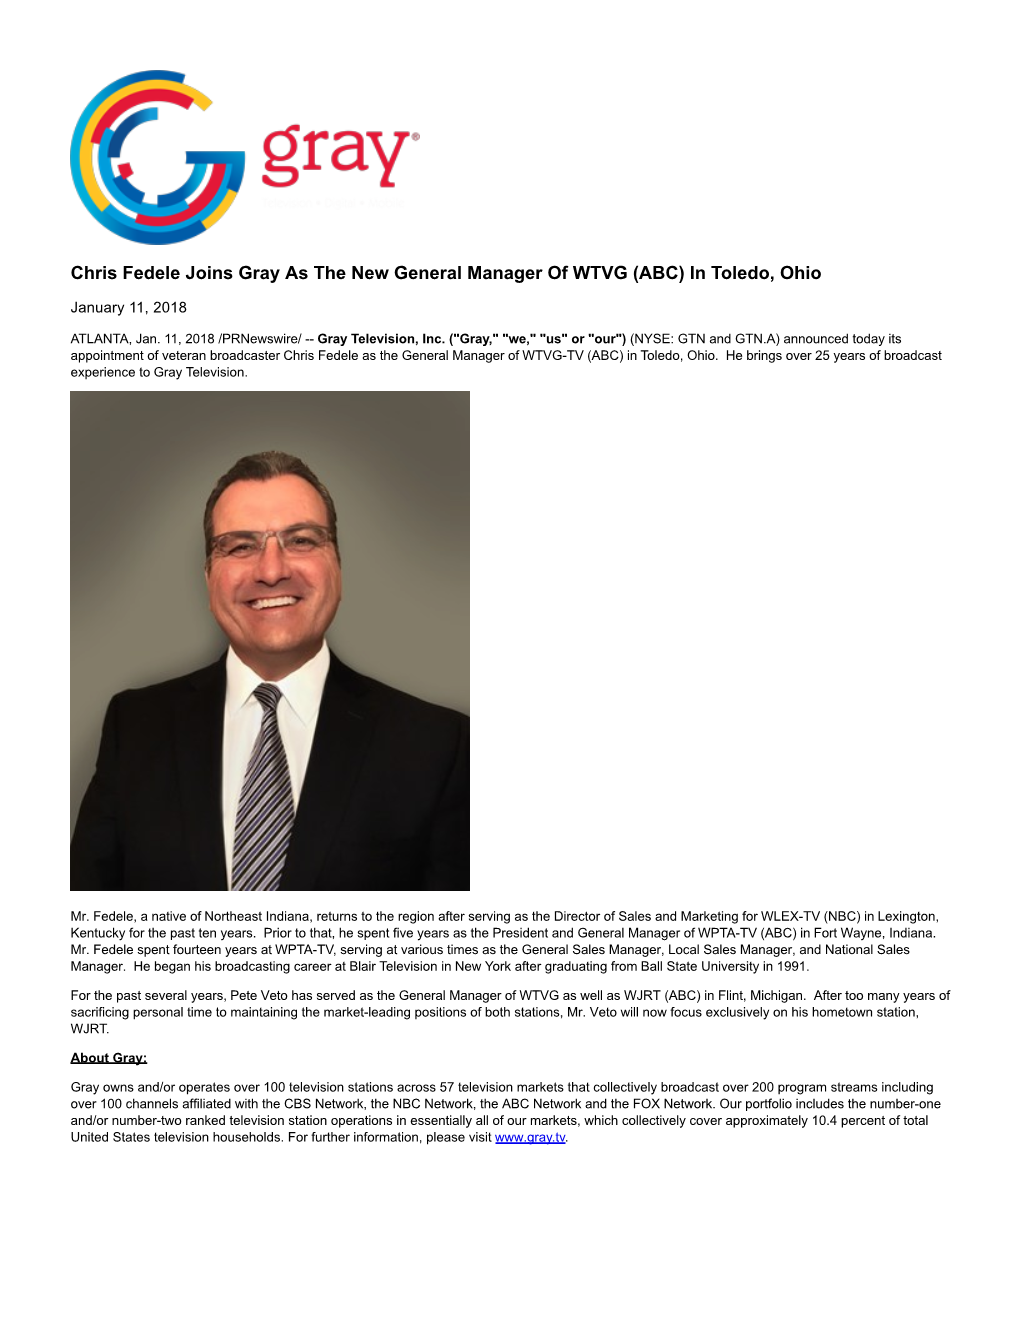 Chris Fedele Joins Gray As the New General Manager of WTVG (ABC) in Toledo, Ohio